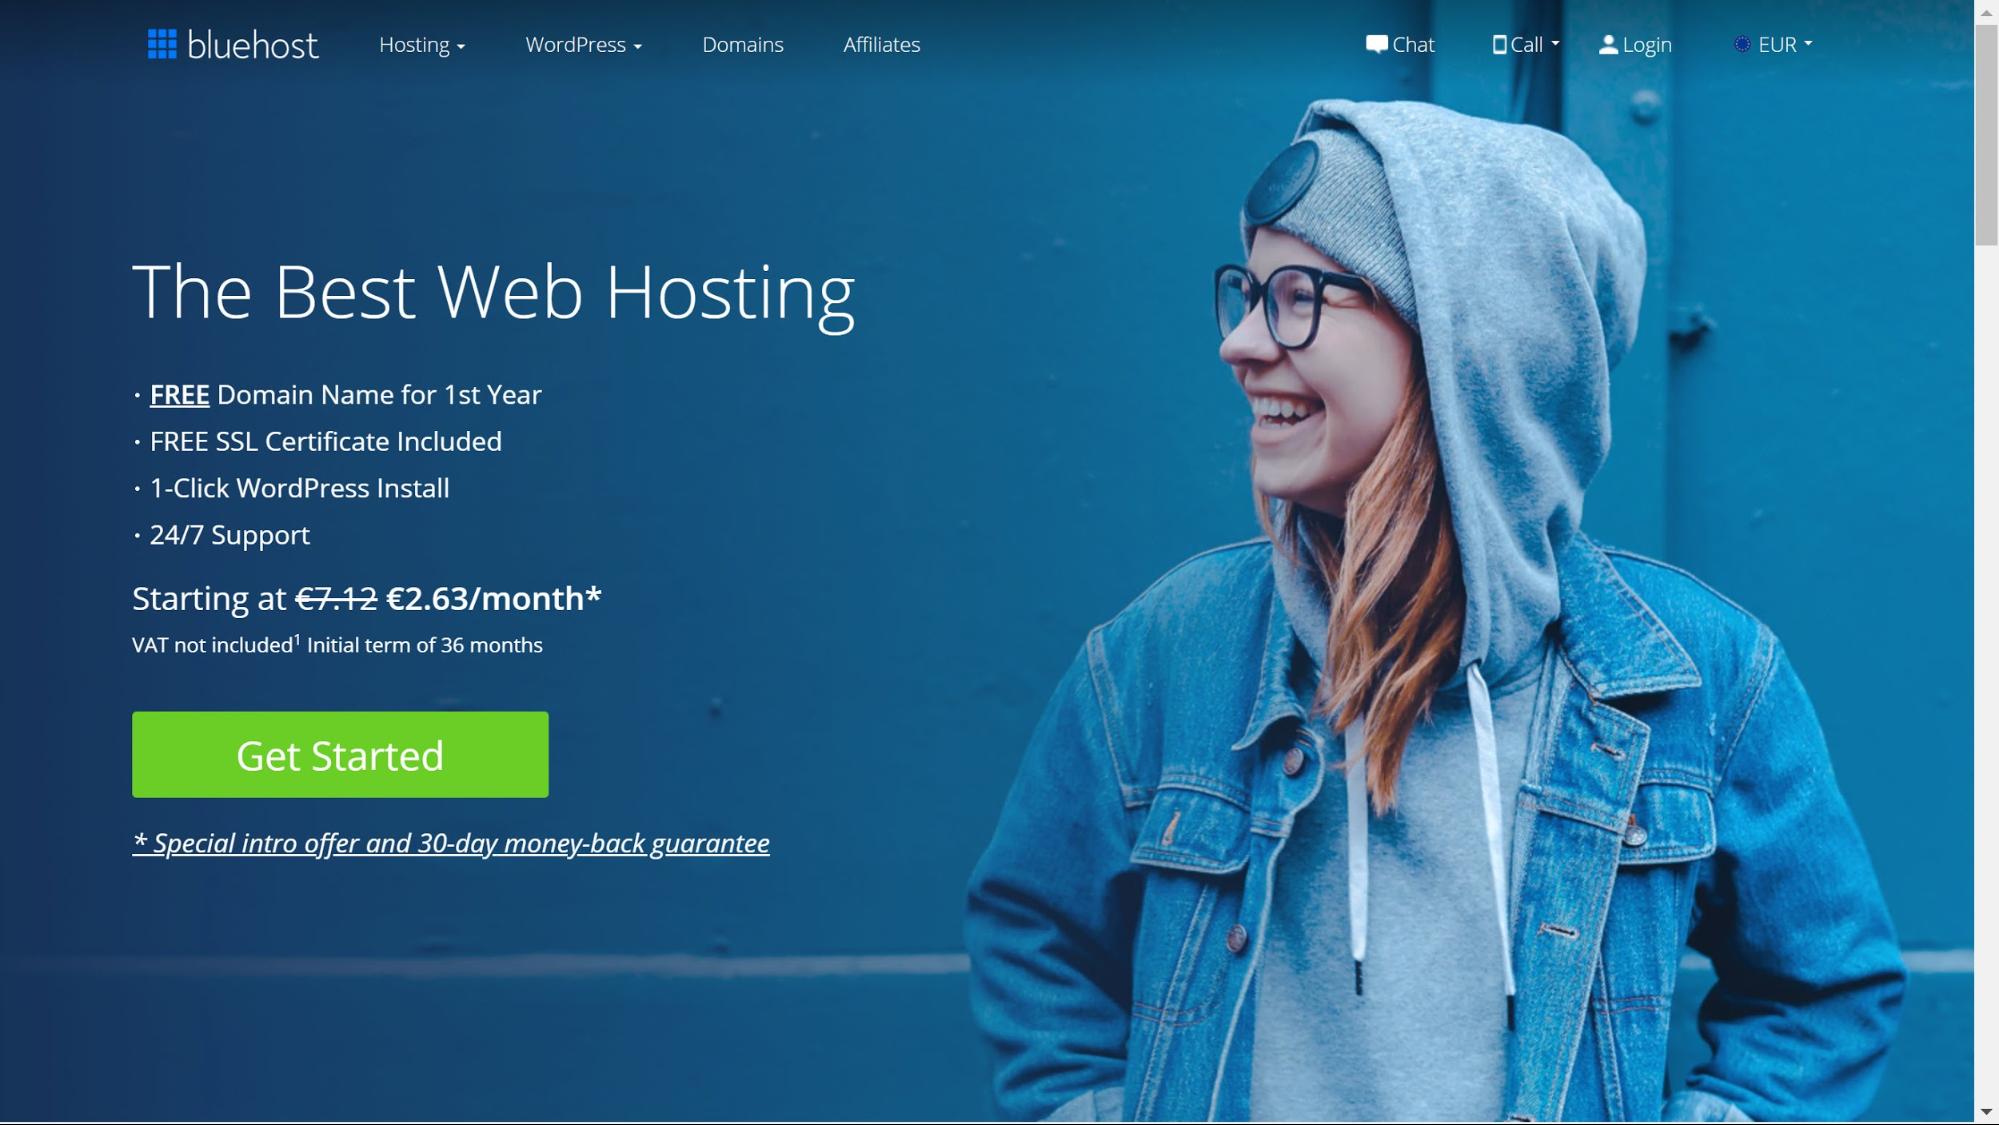 Bluehost is a great option to host directory websites on WordPress